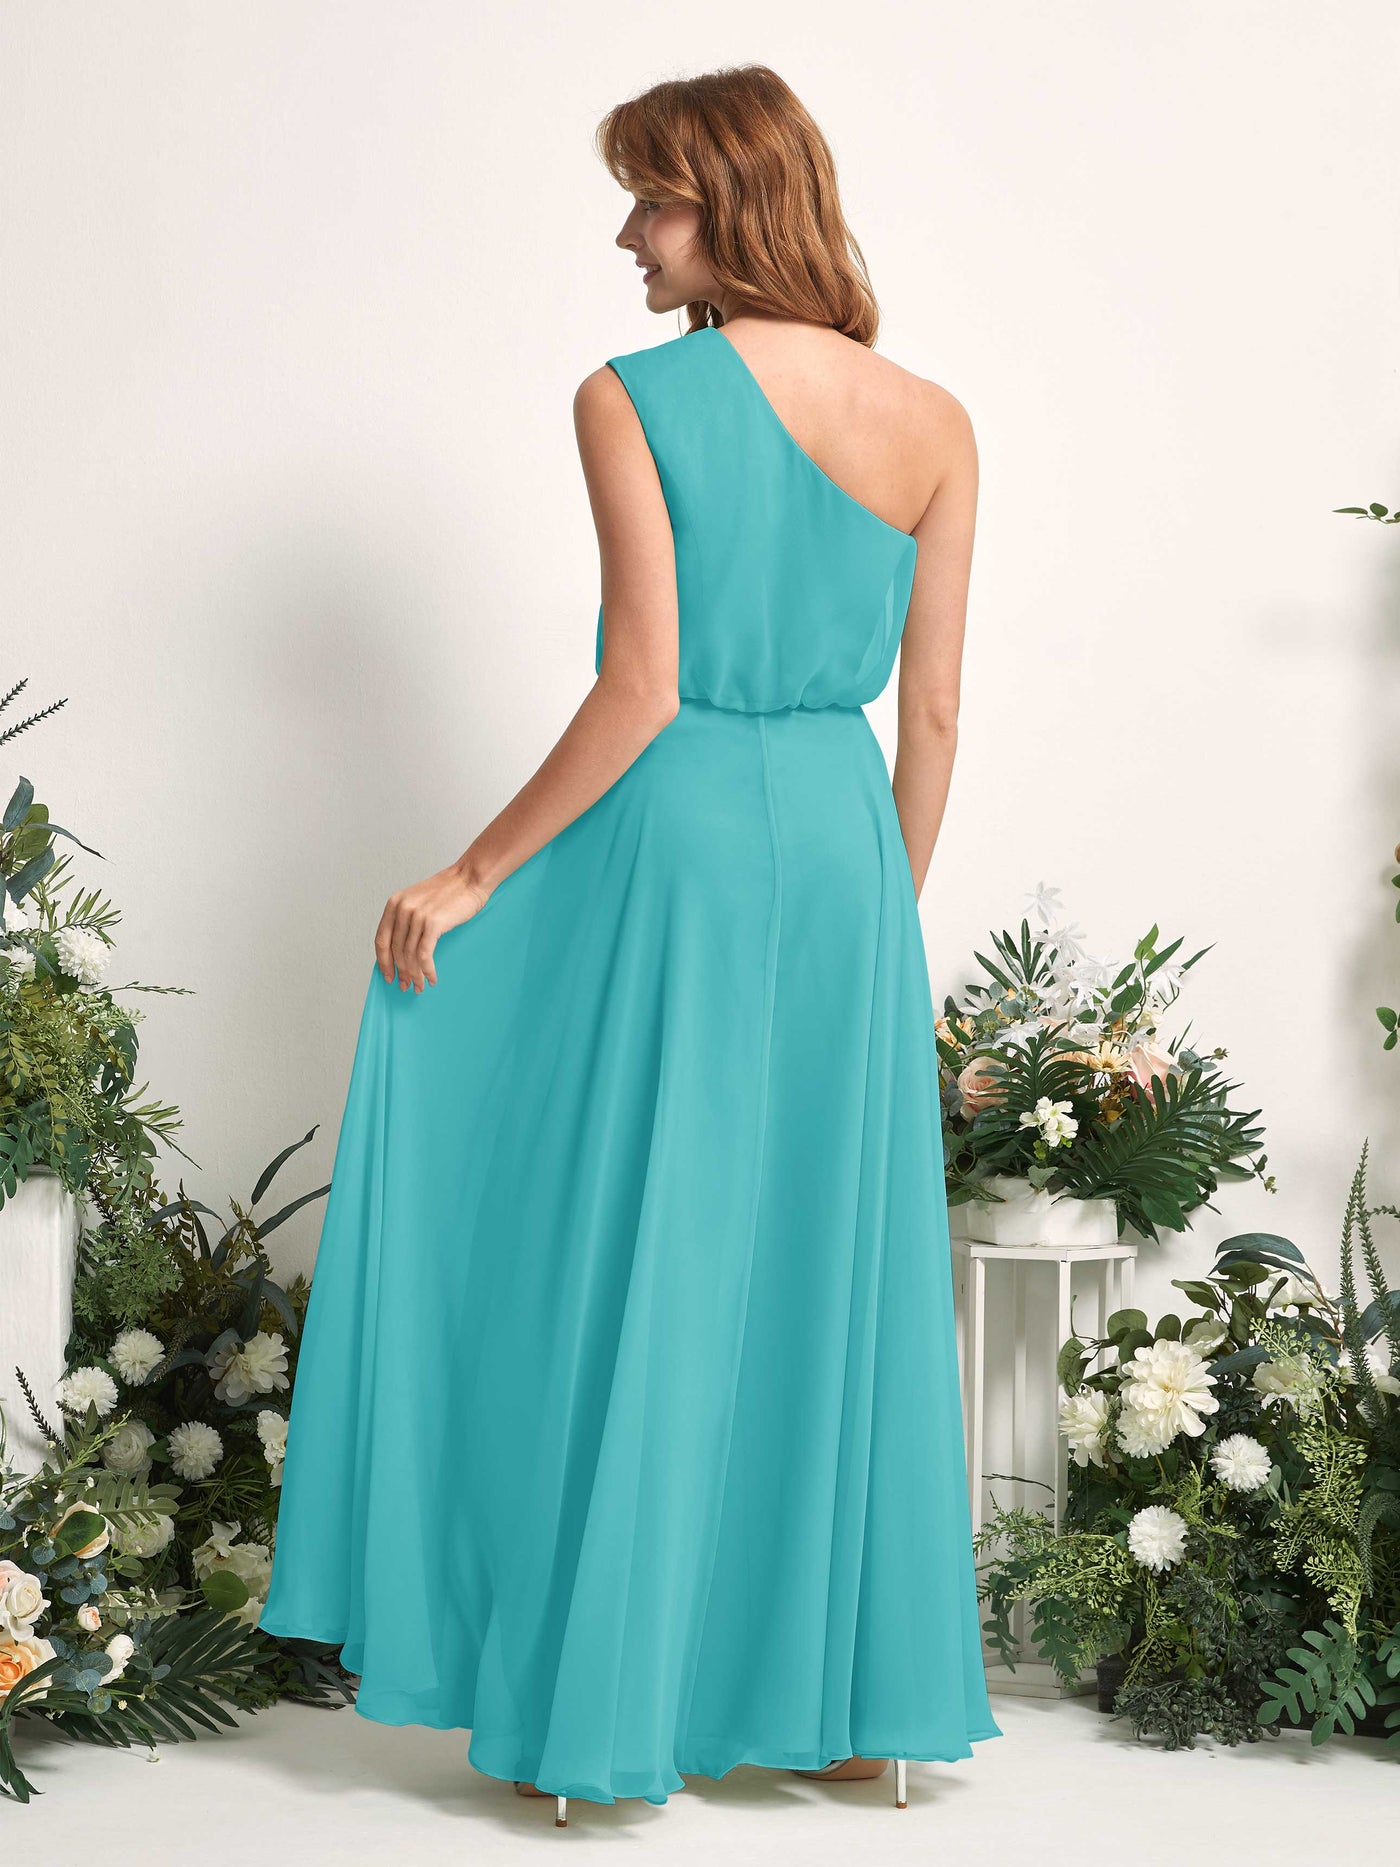 Bridesmaid Dress A-line Chiffon One Shoulder Full Length Sleeveless Wedding Party Dress - Turquoise (81226823)#color_turquoise